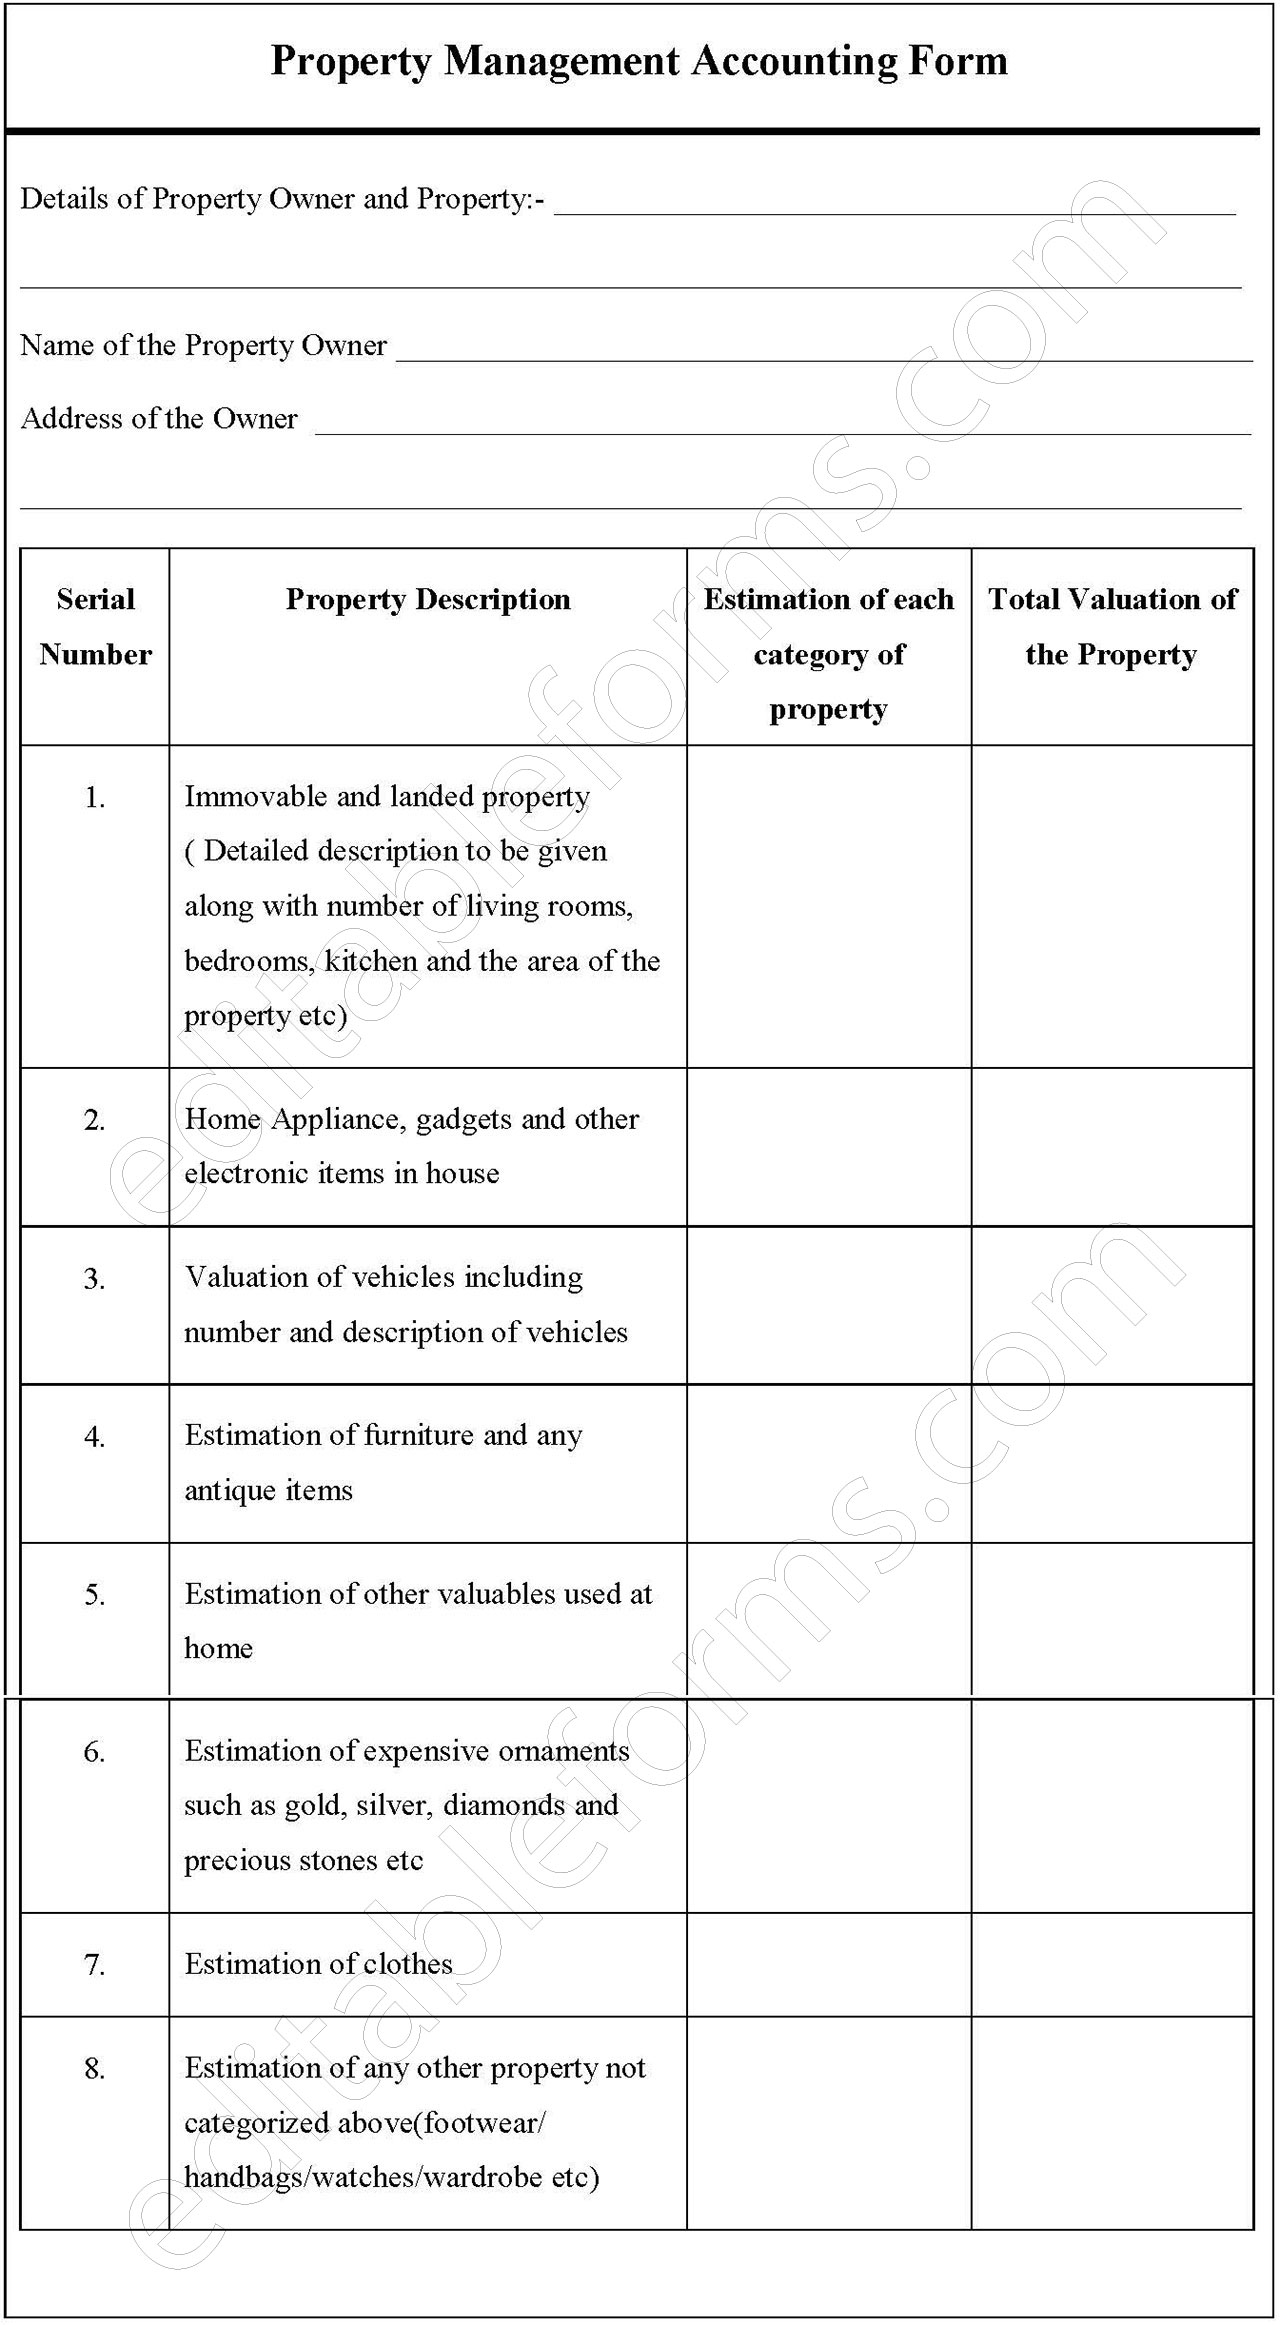 Property Management Accounting Form